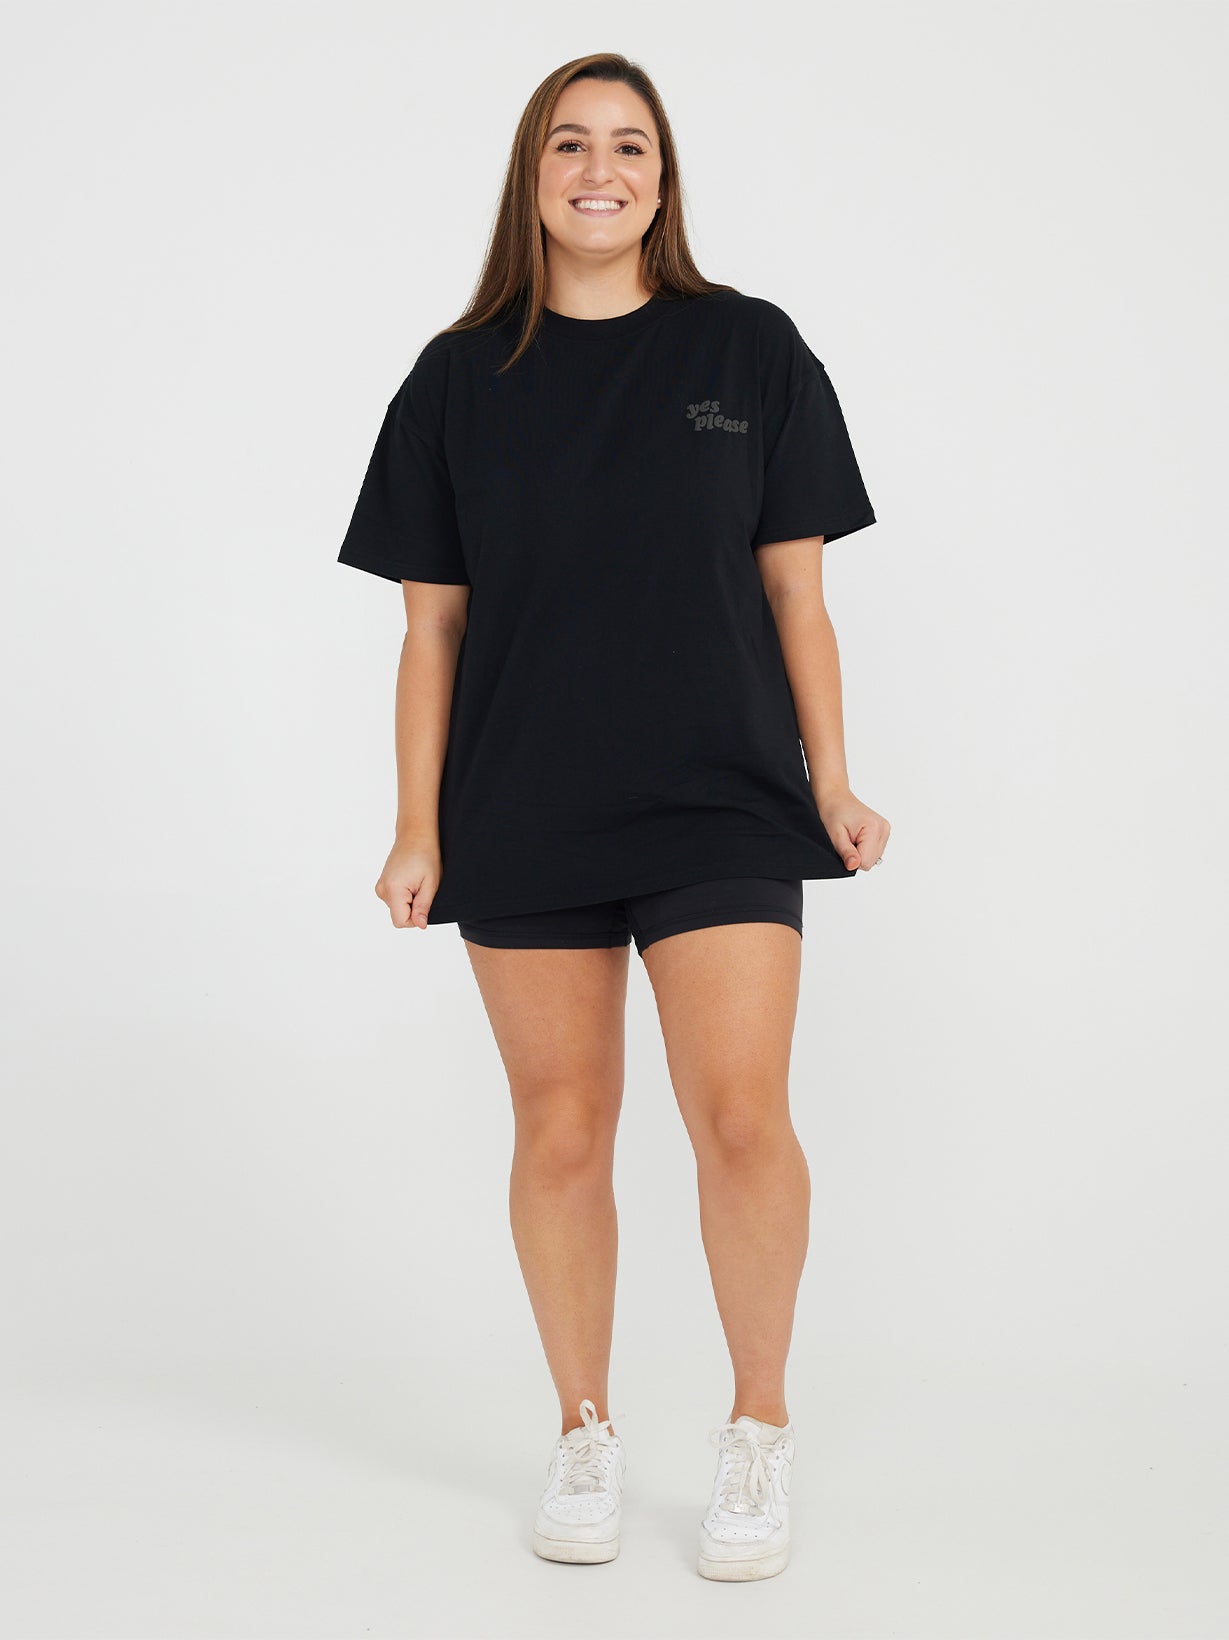 Yes Please Tee - All Black